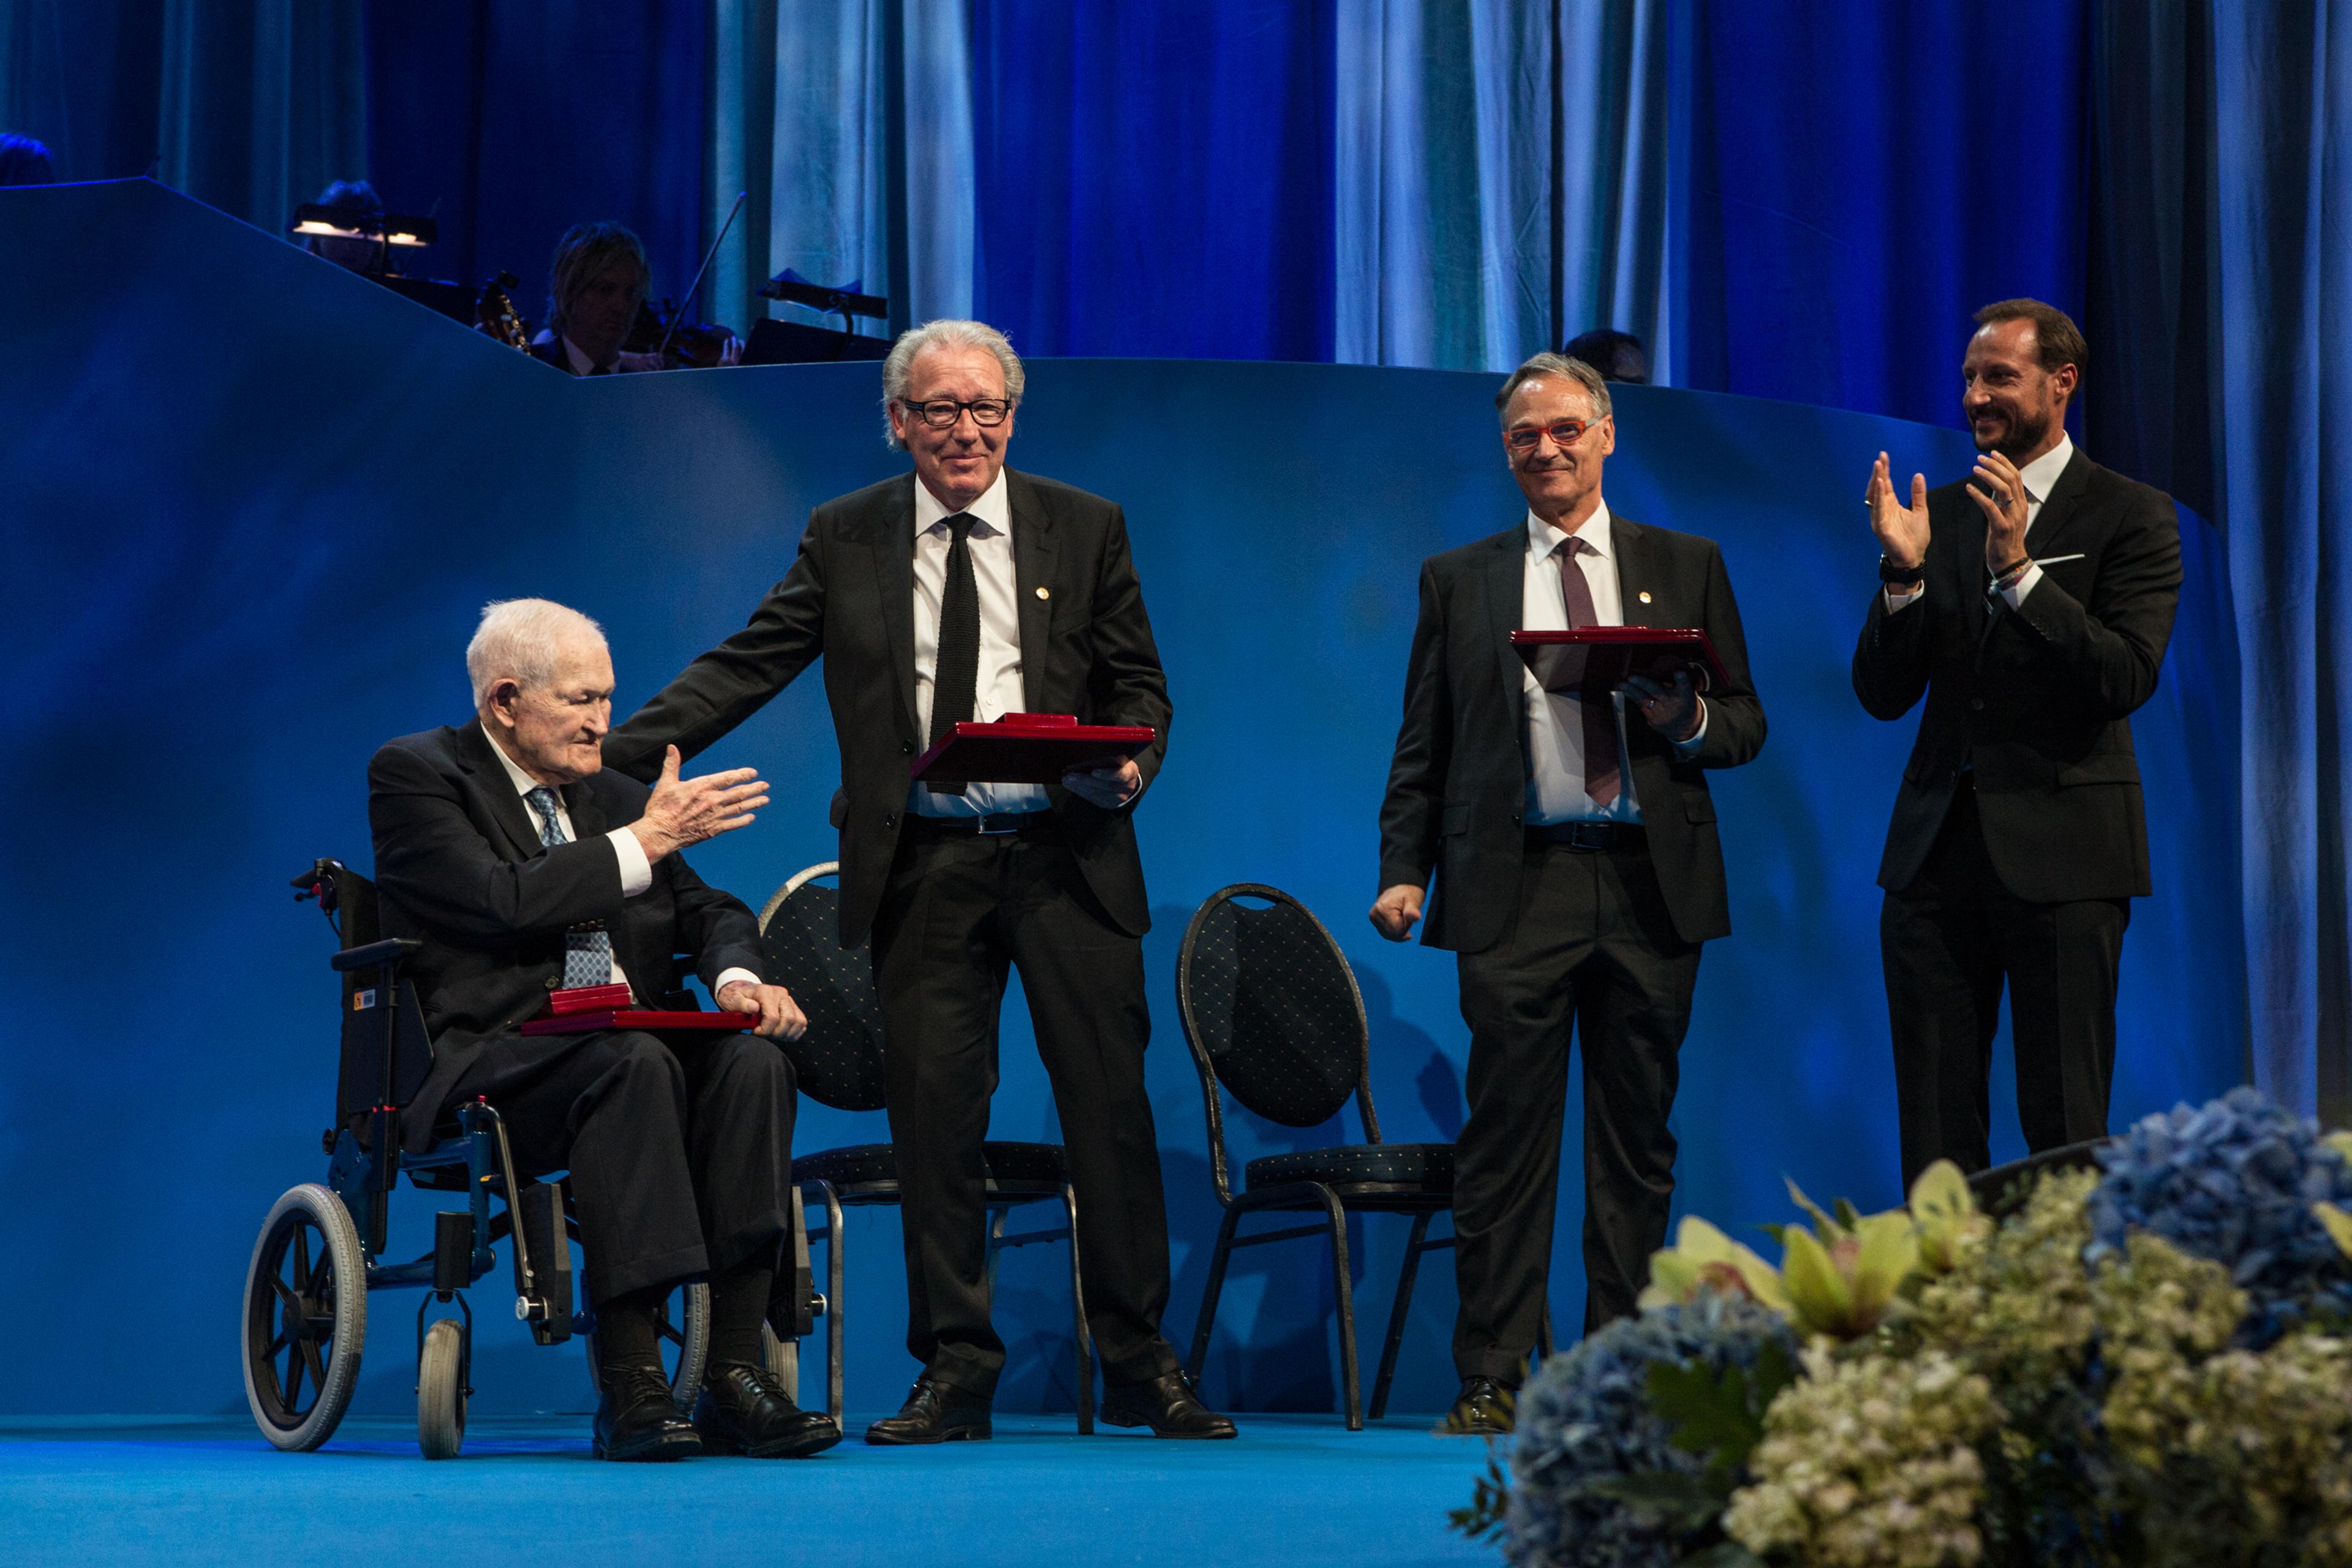 The three nanoscience laureates on stage at the ceremony in Oslo with their awards; from left: Calvin Quate, Christoph Gerber, Gerd Binnig and His Royal Highness Crown Prince Haakon 